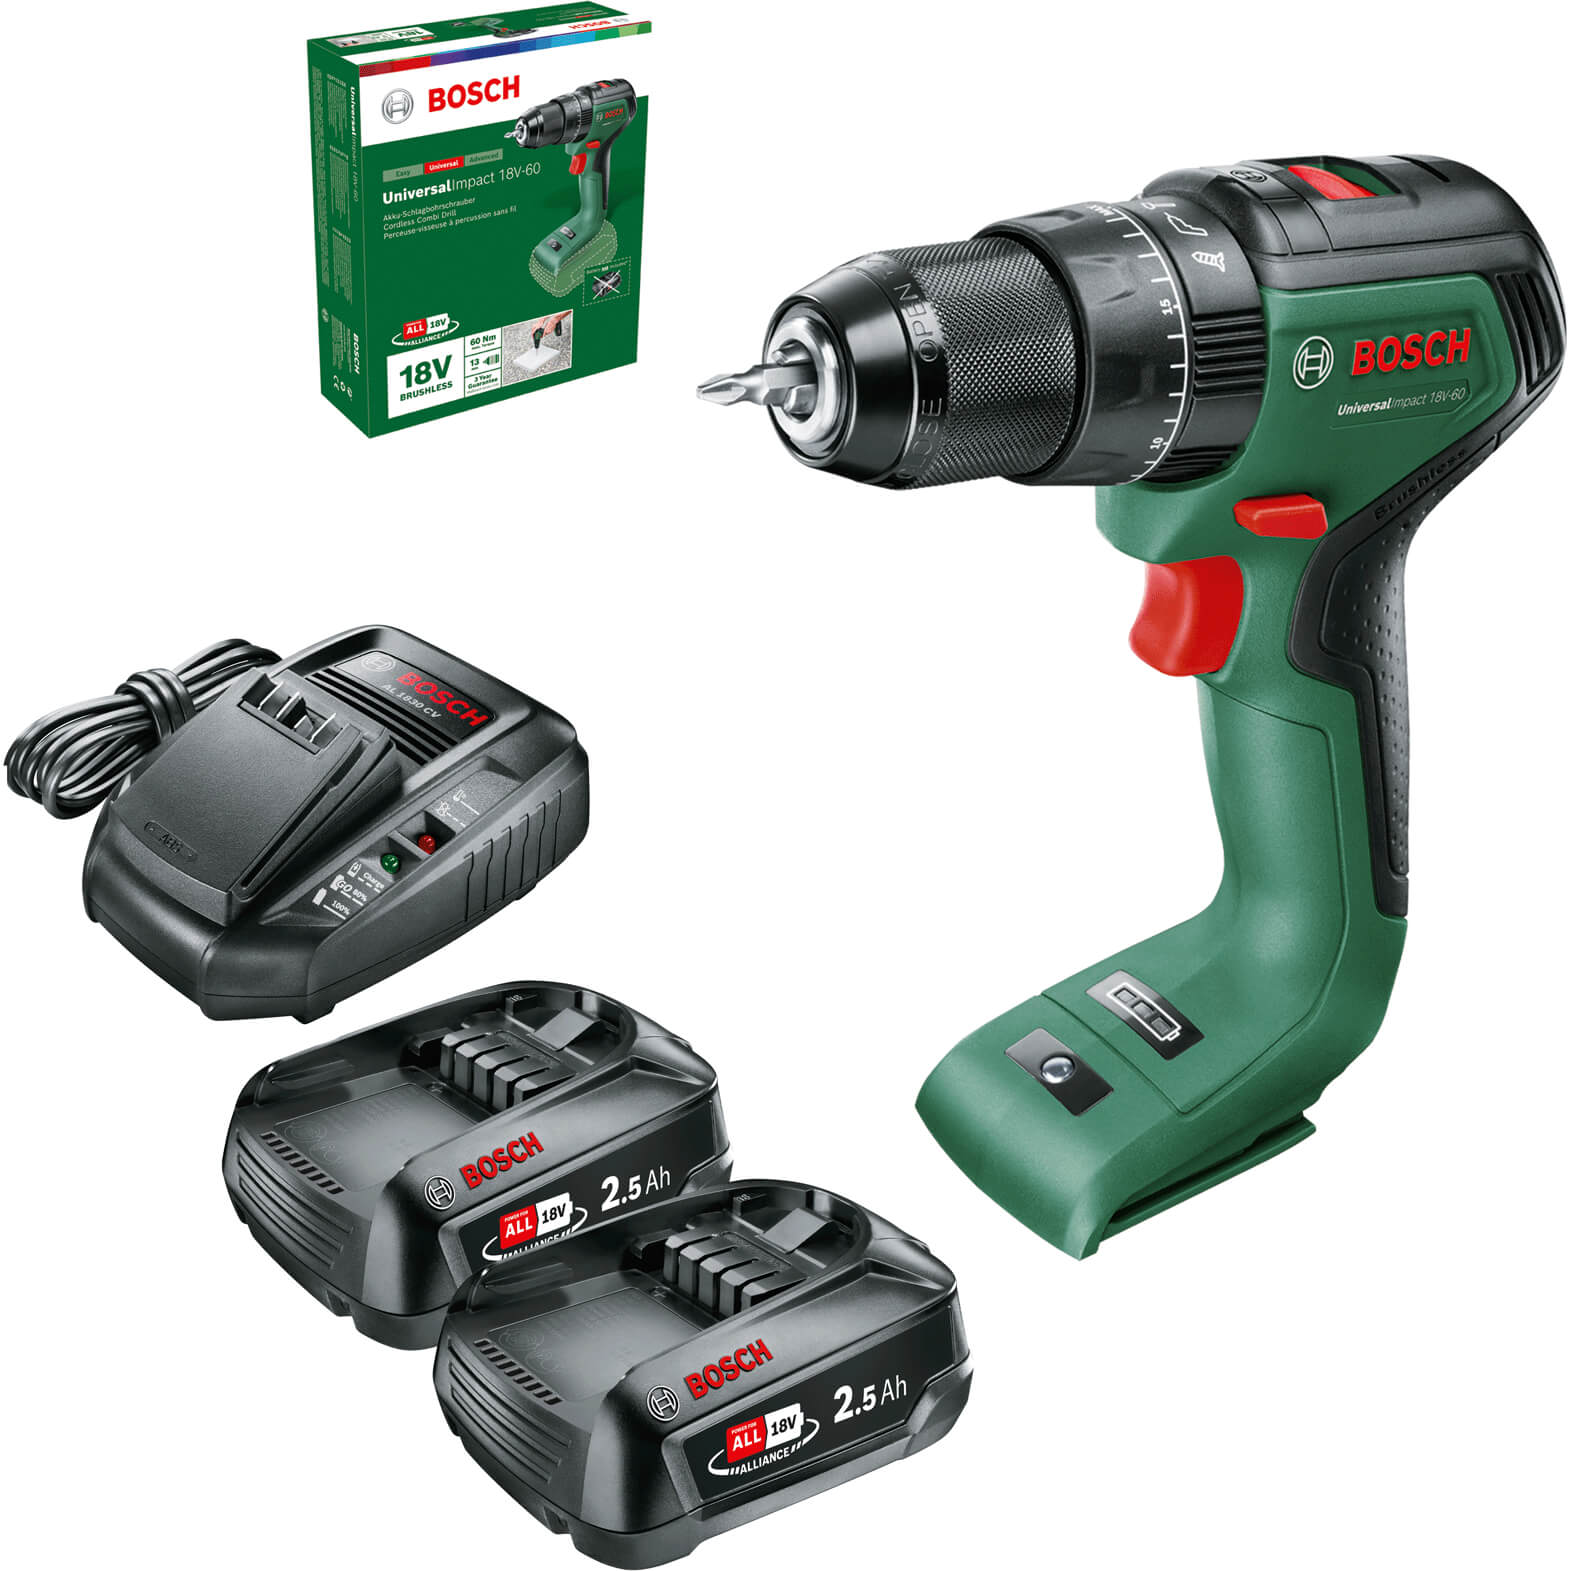 Image of Bosch UNIVERSALIMPACT 18V-60 18v Cordless Brushless Combi Drill 2 x 2.5ah Li-ion Charger No Case